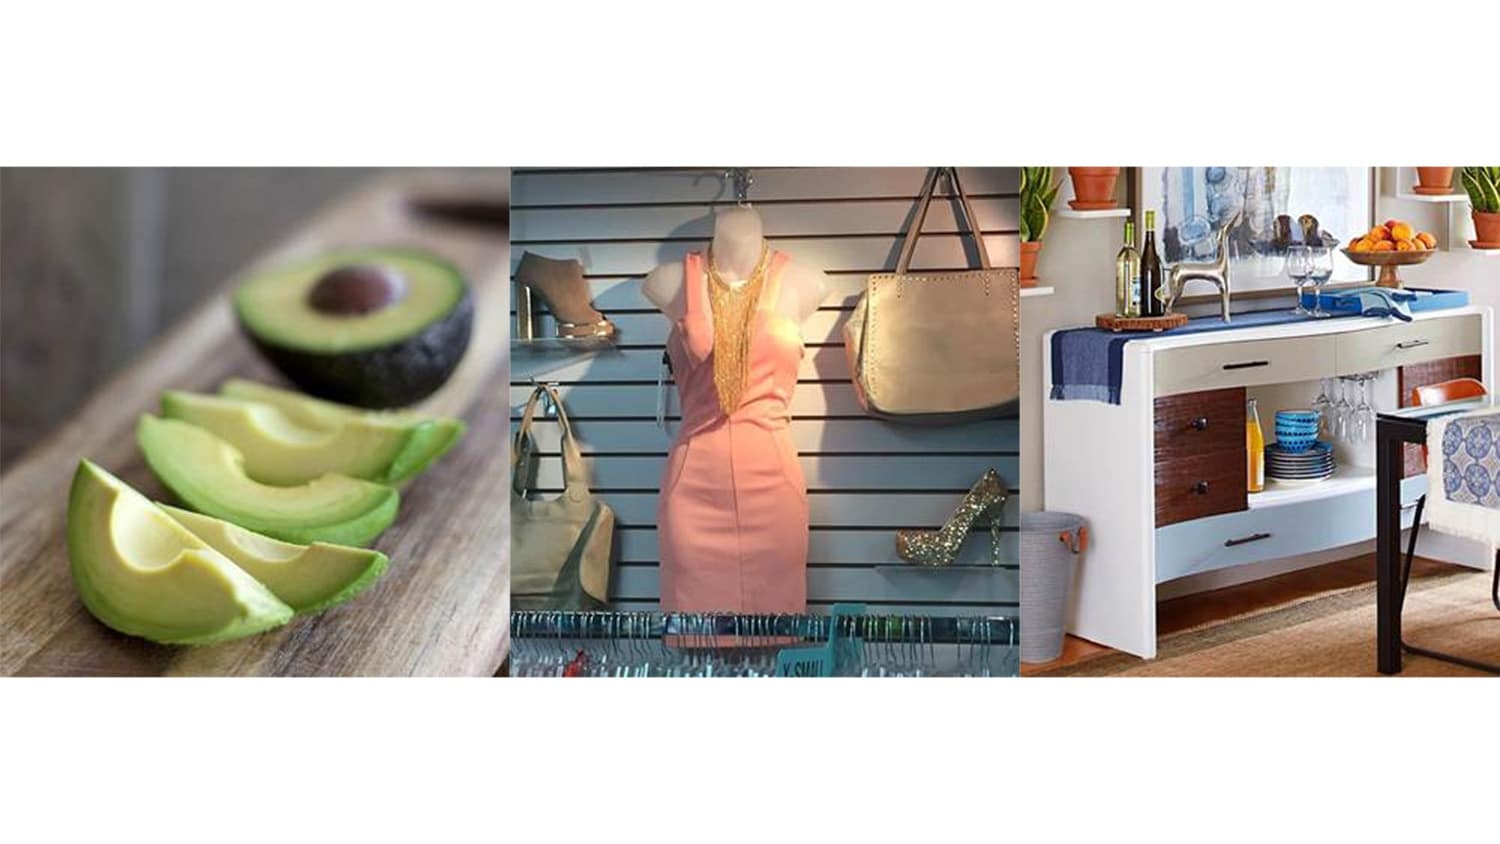 the image contains three photographs: on the left is a sliced avocado; in the center is a collection of clothing in a store; on the right is a well-organized collection of tableware